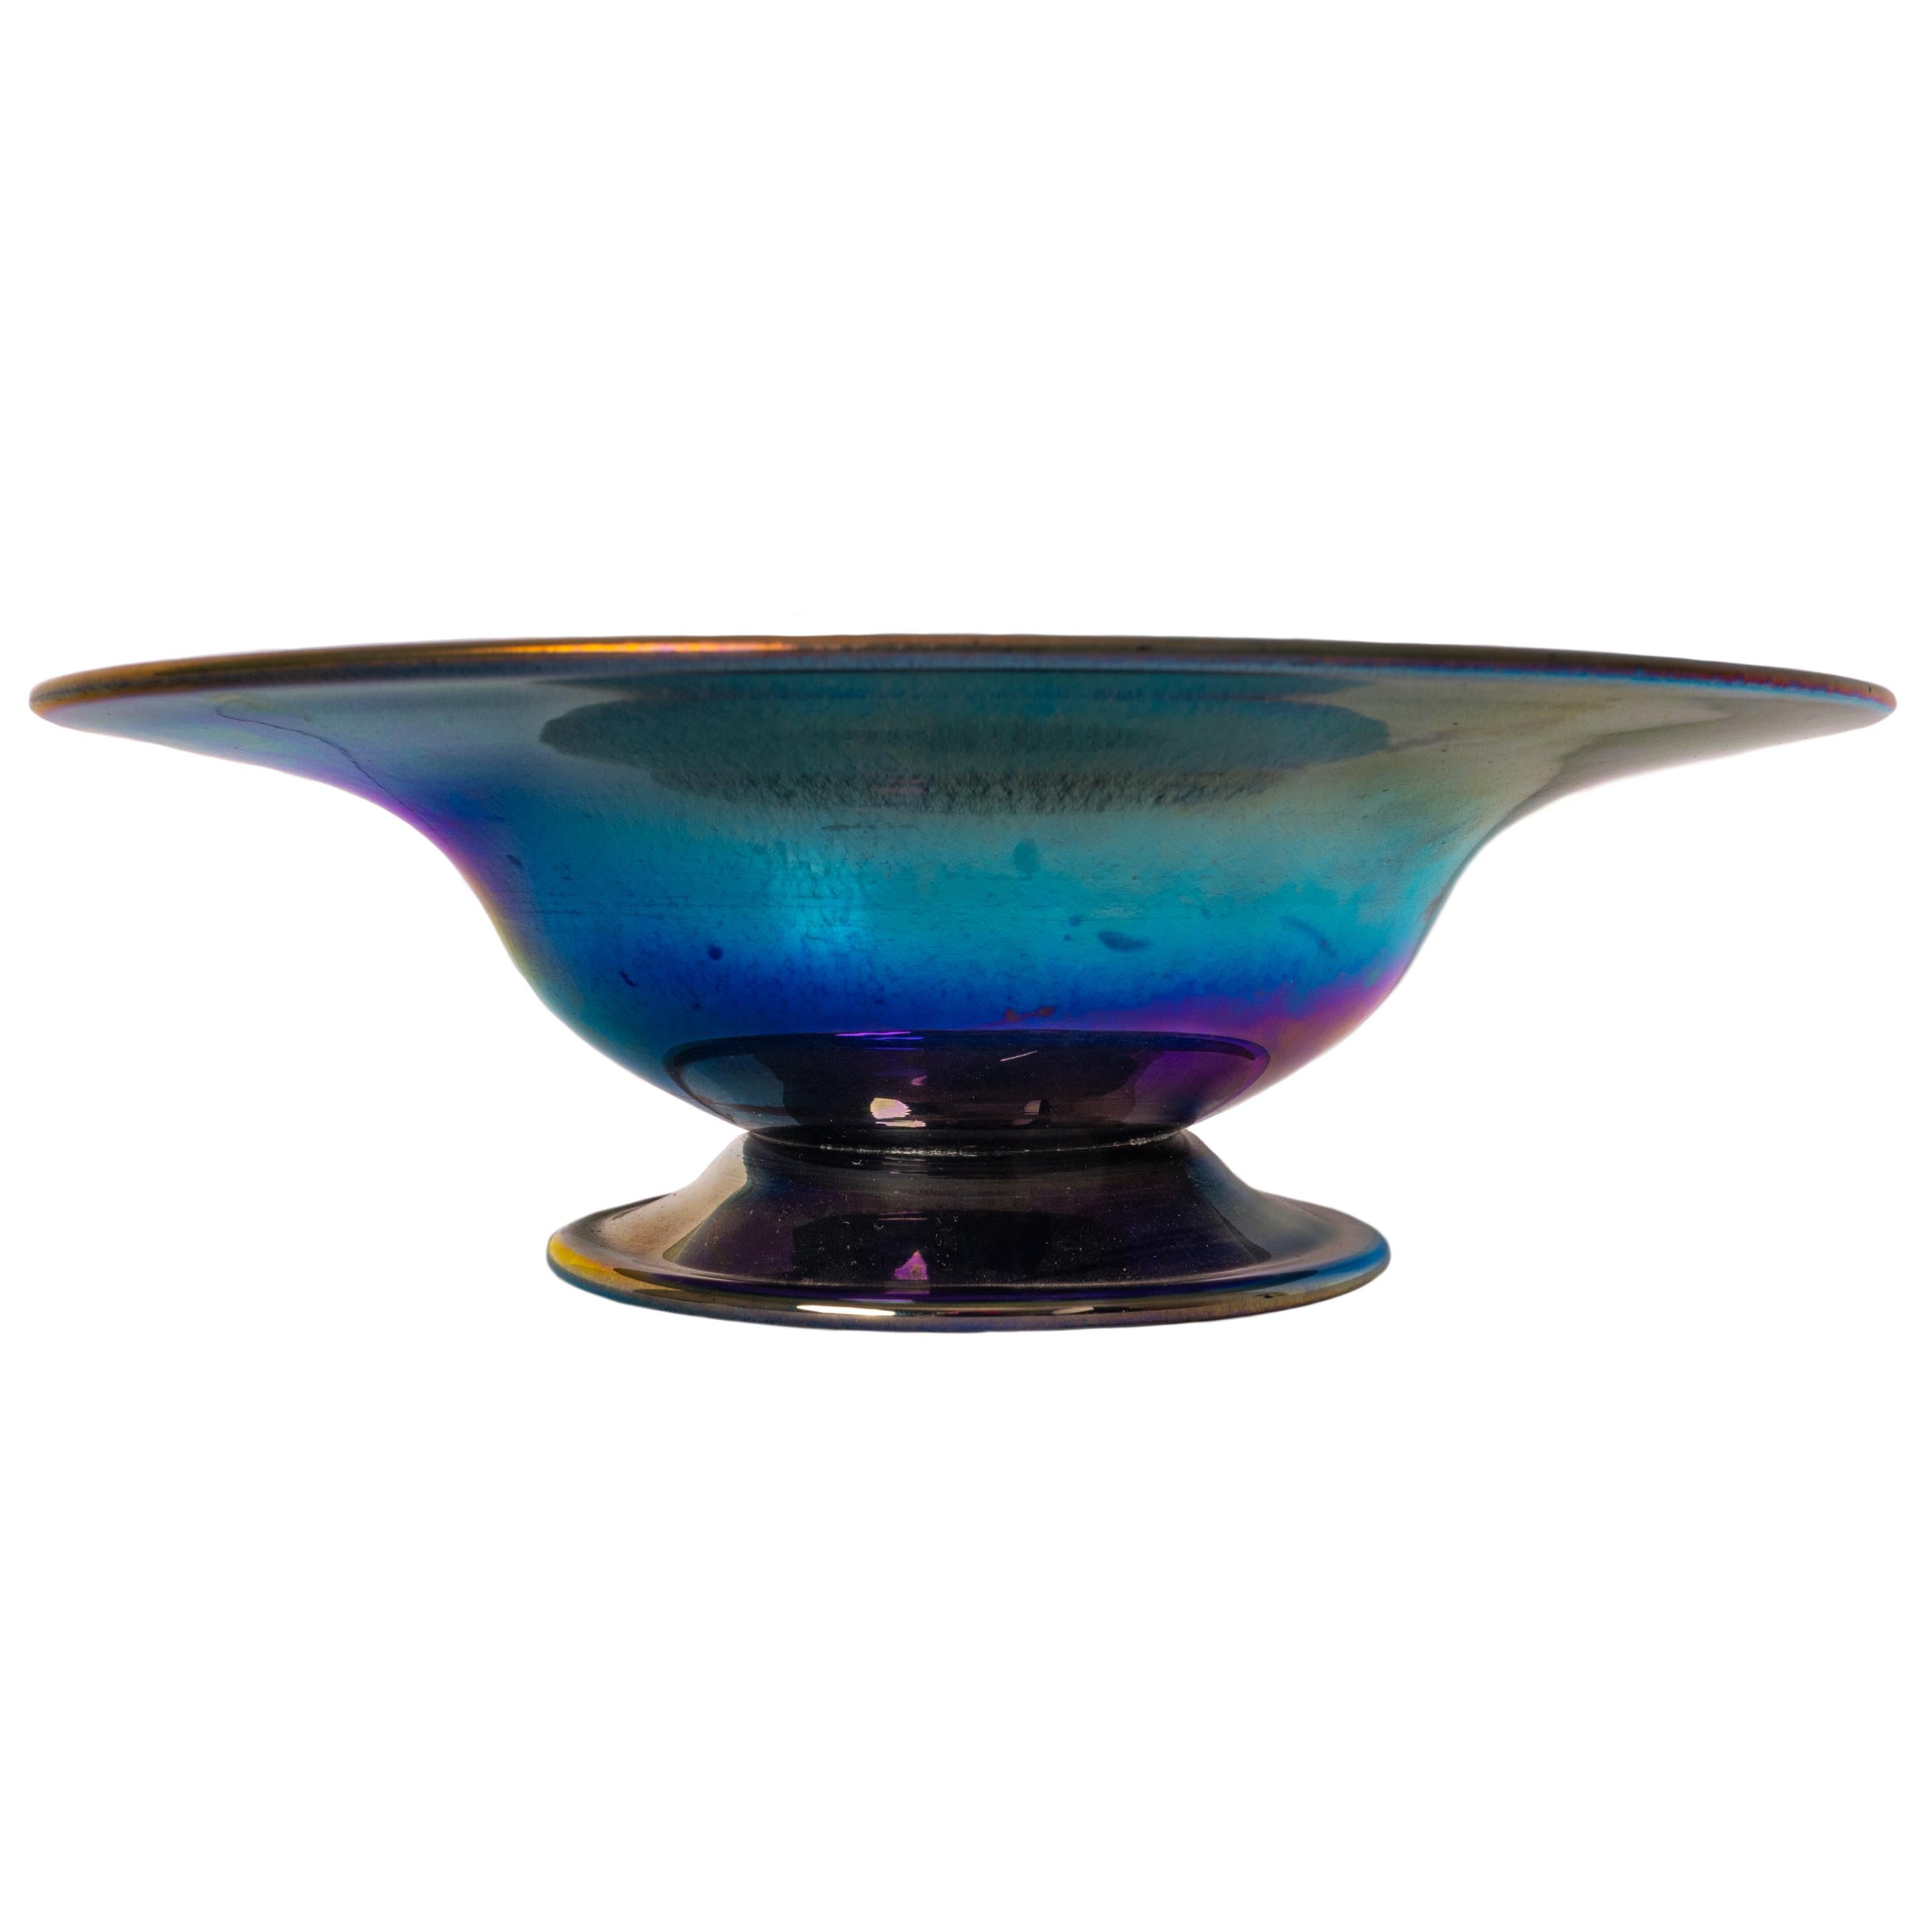 American Large Antique Art Nouveau Tiffany Blue Glass Favrile Footed Bowl Compote, 1910 For Sale